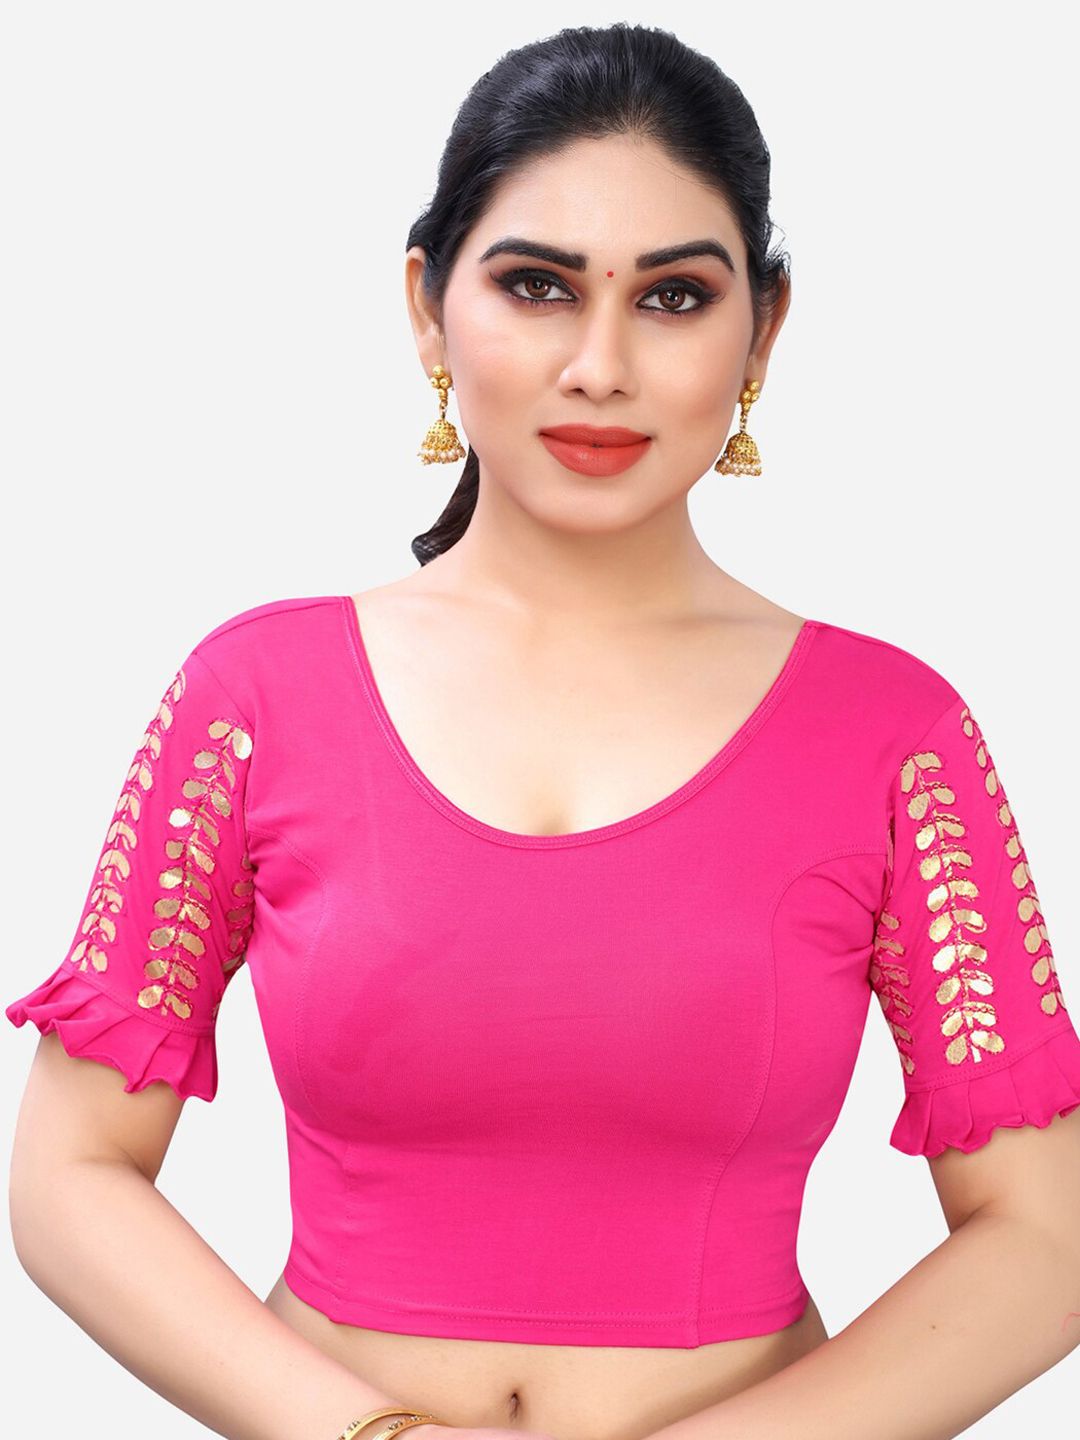 SIRIL Women Pink & Golden Embroidered Saree Blouse Price in India